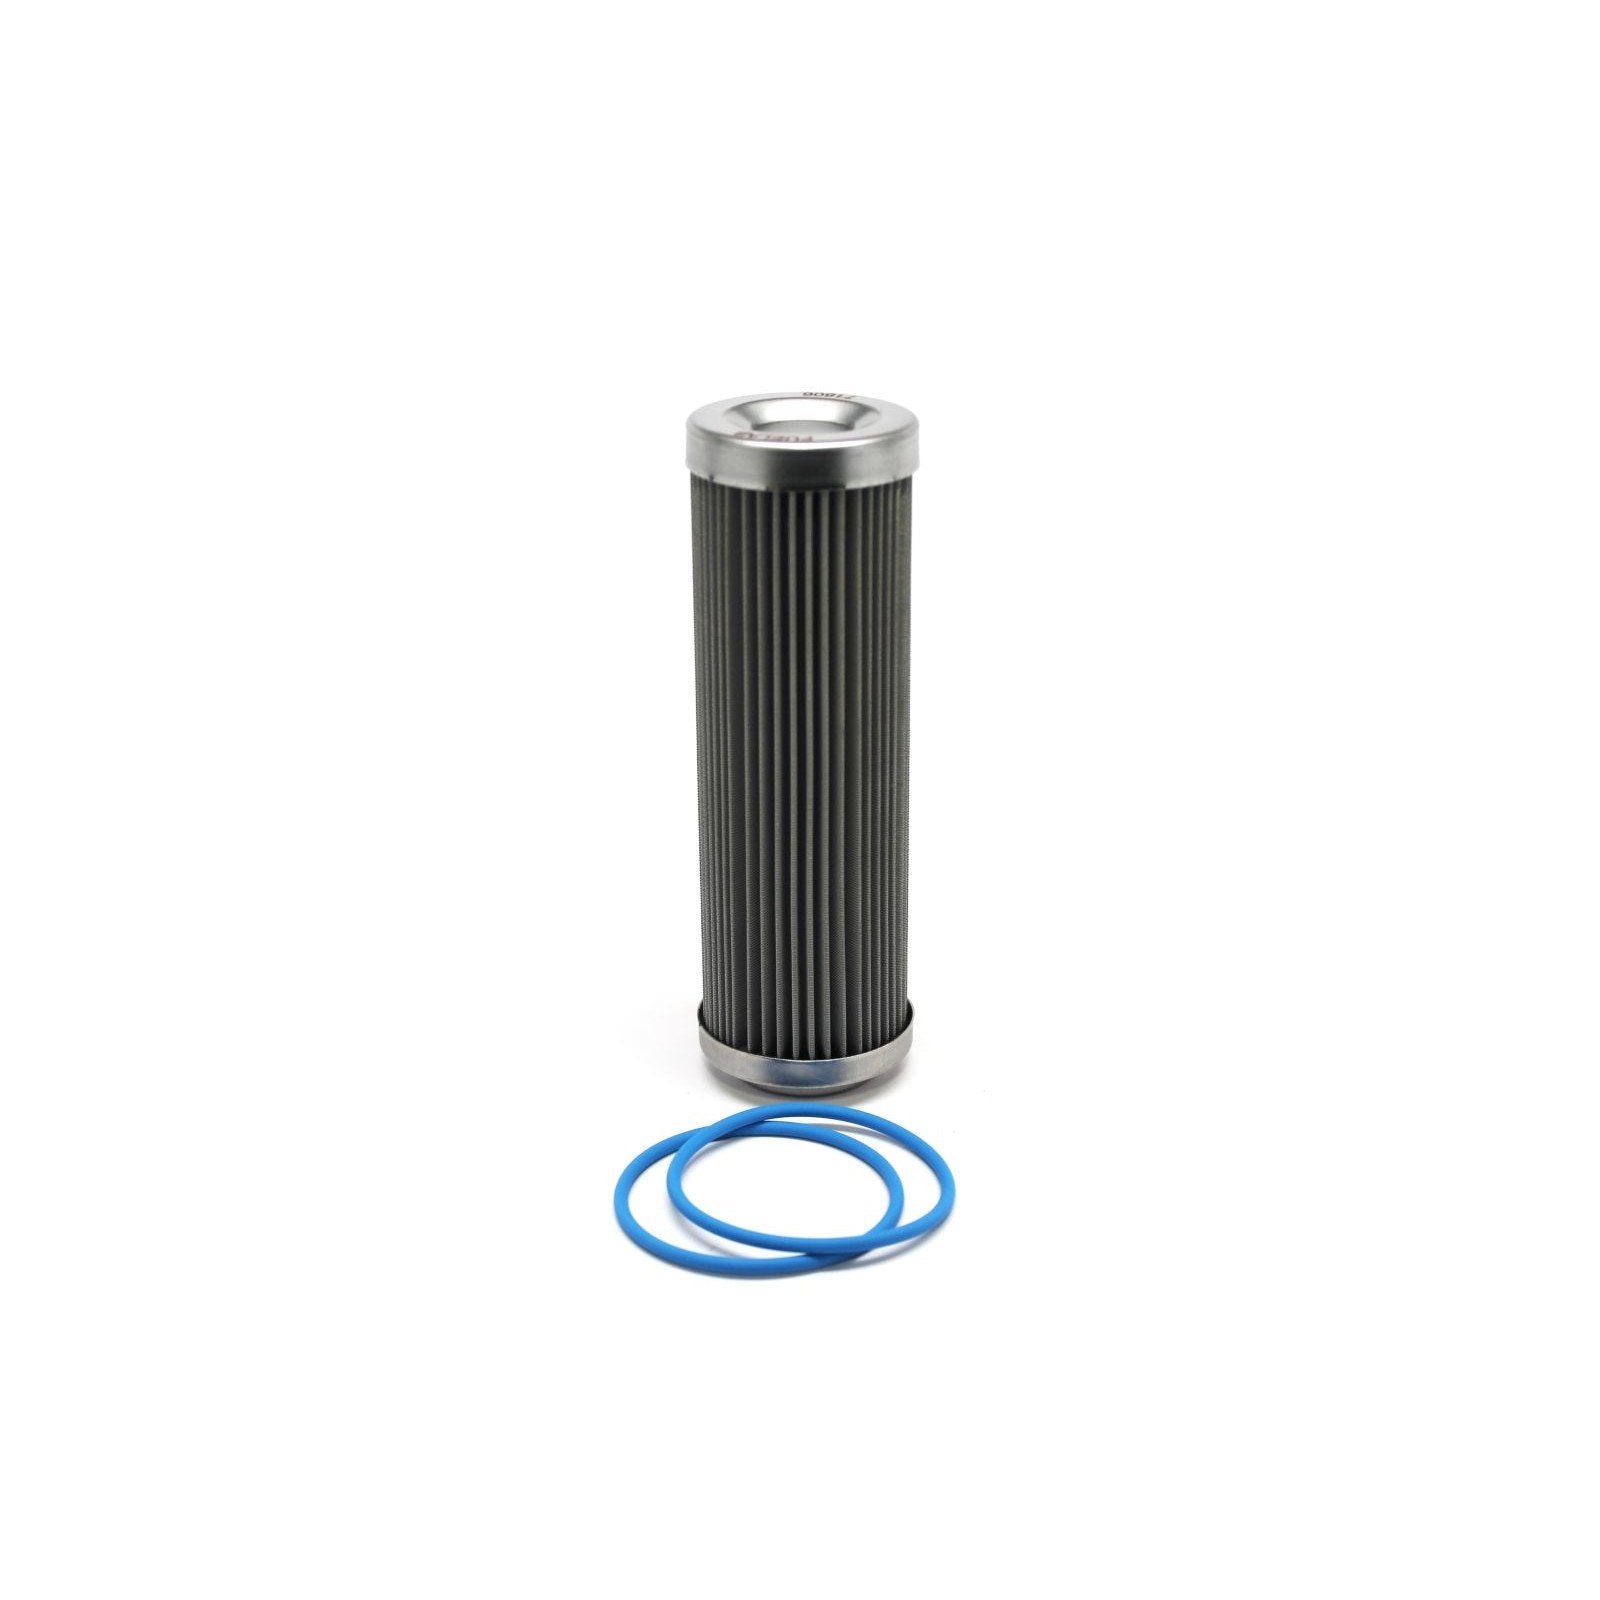 FUELAB replacement filter element replacement filter - PARTS33 GmbH